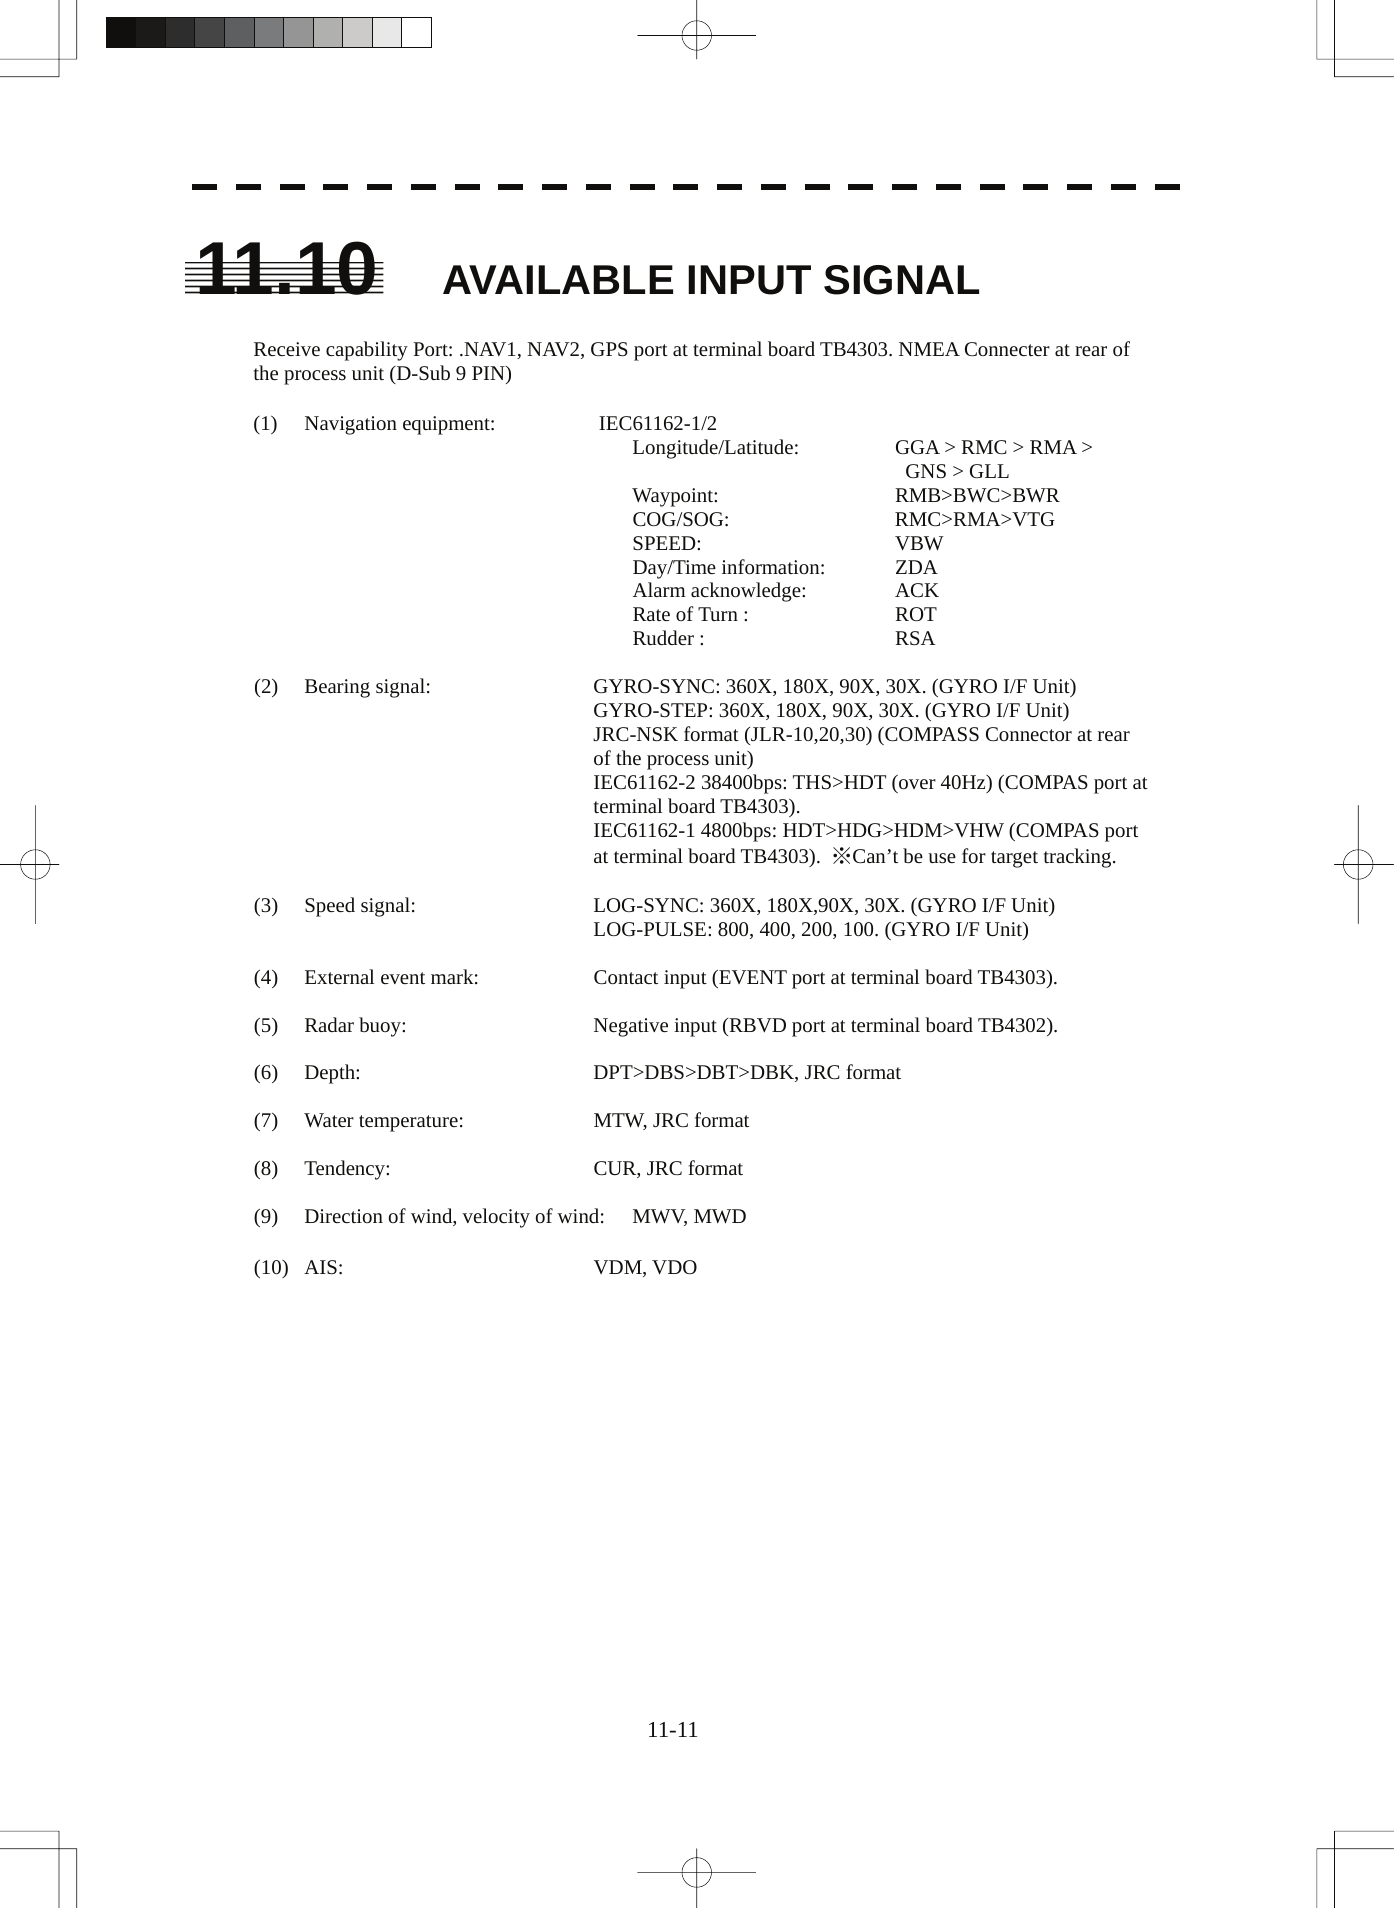  11-11 11.10 AVAILABLE INPUT SIGNAL  Receive capability Port: .NAV1, NAV2, GPS port at terminal board TB4303. NMEA Connecter at rear of the process unit (D-Sub 9 PIN)  (1) Navigation equipment:   IEC61162-1/2   Longitude/Latitude:   GGA &gt; RMC &gt; RMA &gt;      GNS &gt; GLL  Waypoint:   RMB&gt;BWC&gt;BWR  COG/SOG:    RMC&gt;RMA&gt;VTG  SPEED:   VBW  Day/Time information:  ZDA  Alarm acknowledge:   ACK  Rate of Turn :    ROT  Rudder :   RSA  (2)  Bearing signal:  GYRO-SYNC: 360X, 180X, 90X, 30X. (GYRO I/F Unit) GYRO-STEP: 360X, 180X, 90X, 30X. (GYRO I/F Unit) JRC-NSK format (JLR-10,20,30) (COMPASS Connector at rear of the process unit) IEC61162-2 38400bps: THS&gt;HDT (over 40Hz) (COMPAS port at terminal board TB4303). IEC61162-1 4800bps: HDT&gt;HDG&gt;HDM&gt;VHW (COMPAS port at terminal board TB4303).  ※Can’t be use for target tracking.  (3)  Speed signal:  LOG-SYNC: 360X, 180X,90X, 30X. (GYRO I/F Unit) LOG-PULSE: 800, 400, 200, 100. (GYRO I/F Unit)  (4)  External event mark:  Contact input (EVENT port at terminal board TB4303).  (5)  Radar buoy:  Negative input (RBVD port at terminal board TB4302).  (6)  Depth:    DPT&gt;DBS&gt;DBT&gt;DBK, JRC format  (7)  Water temperature:  MTW, JRC format  (8) Tendency:  CUR, JRC format  (9)  Direction of wind, velocity of wind:  MWV, MWD  (10) AIS:  VDM, VDO   